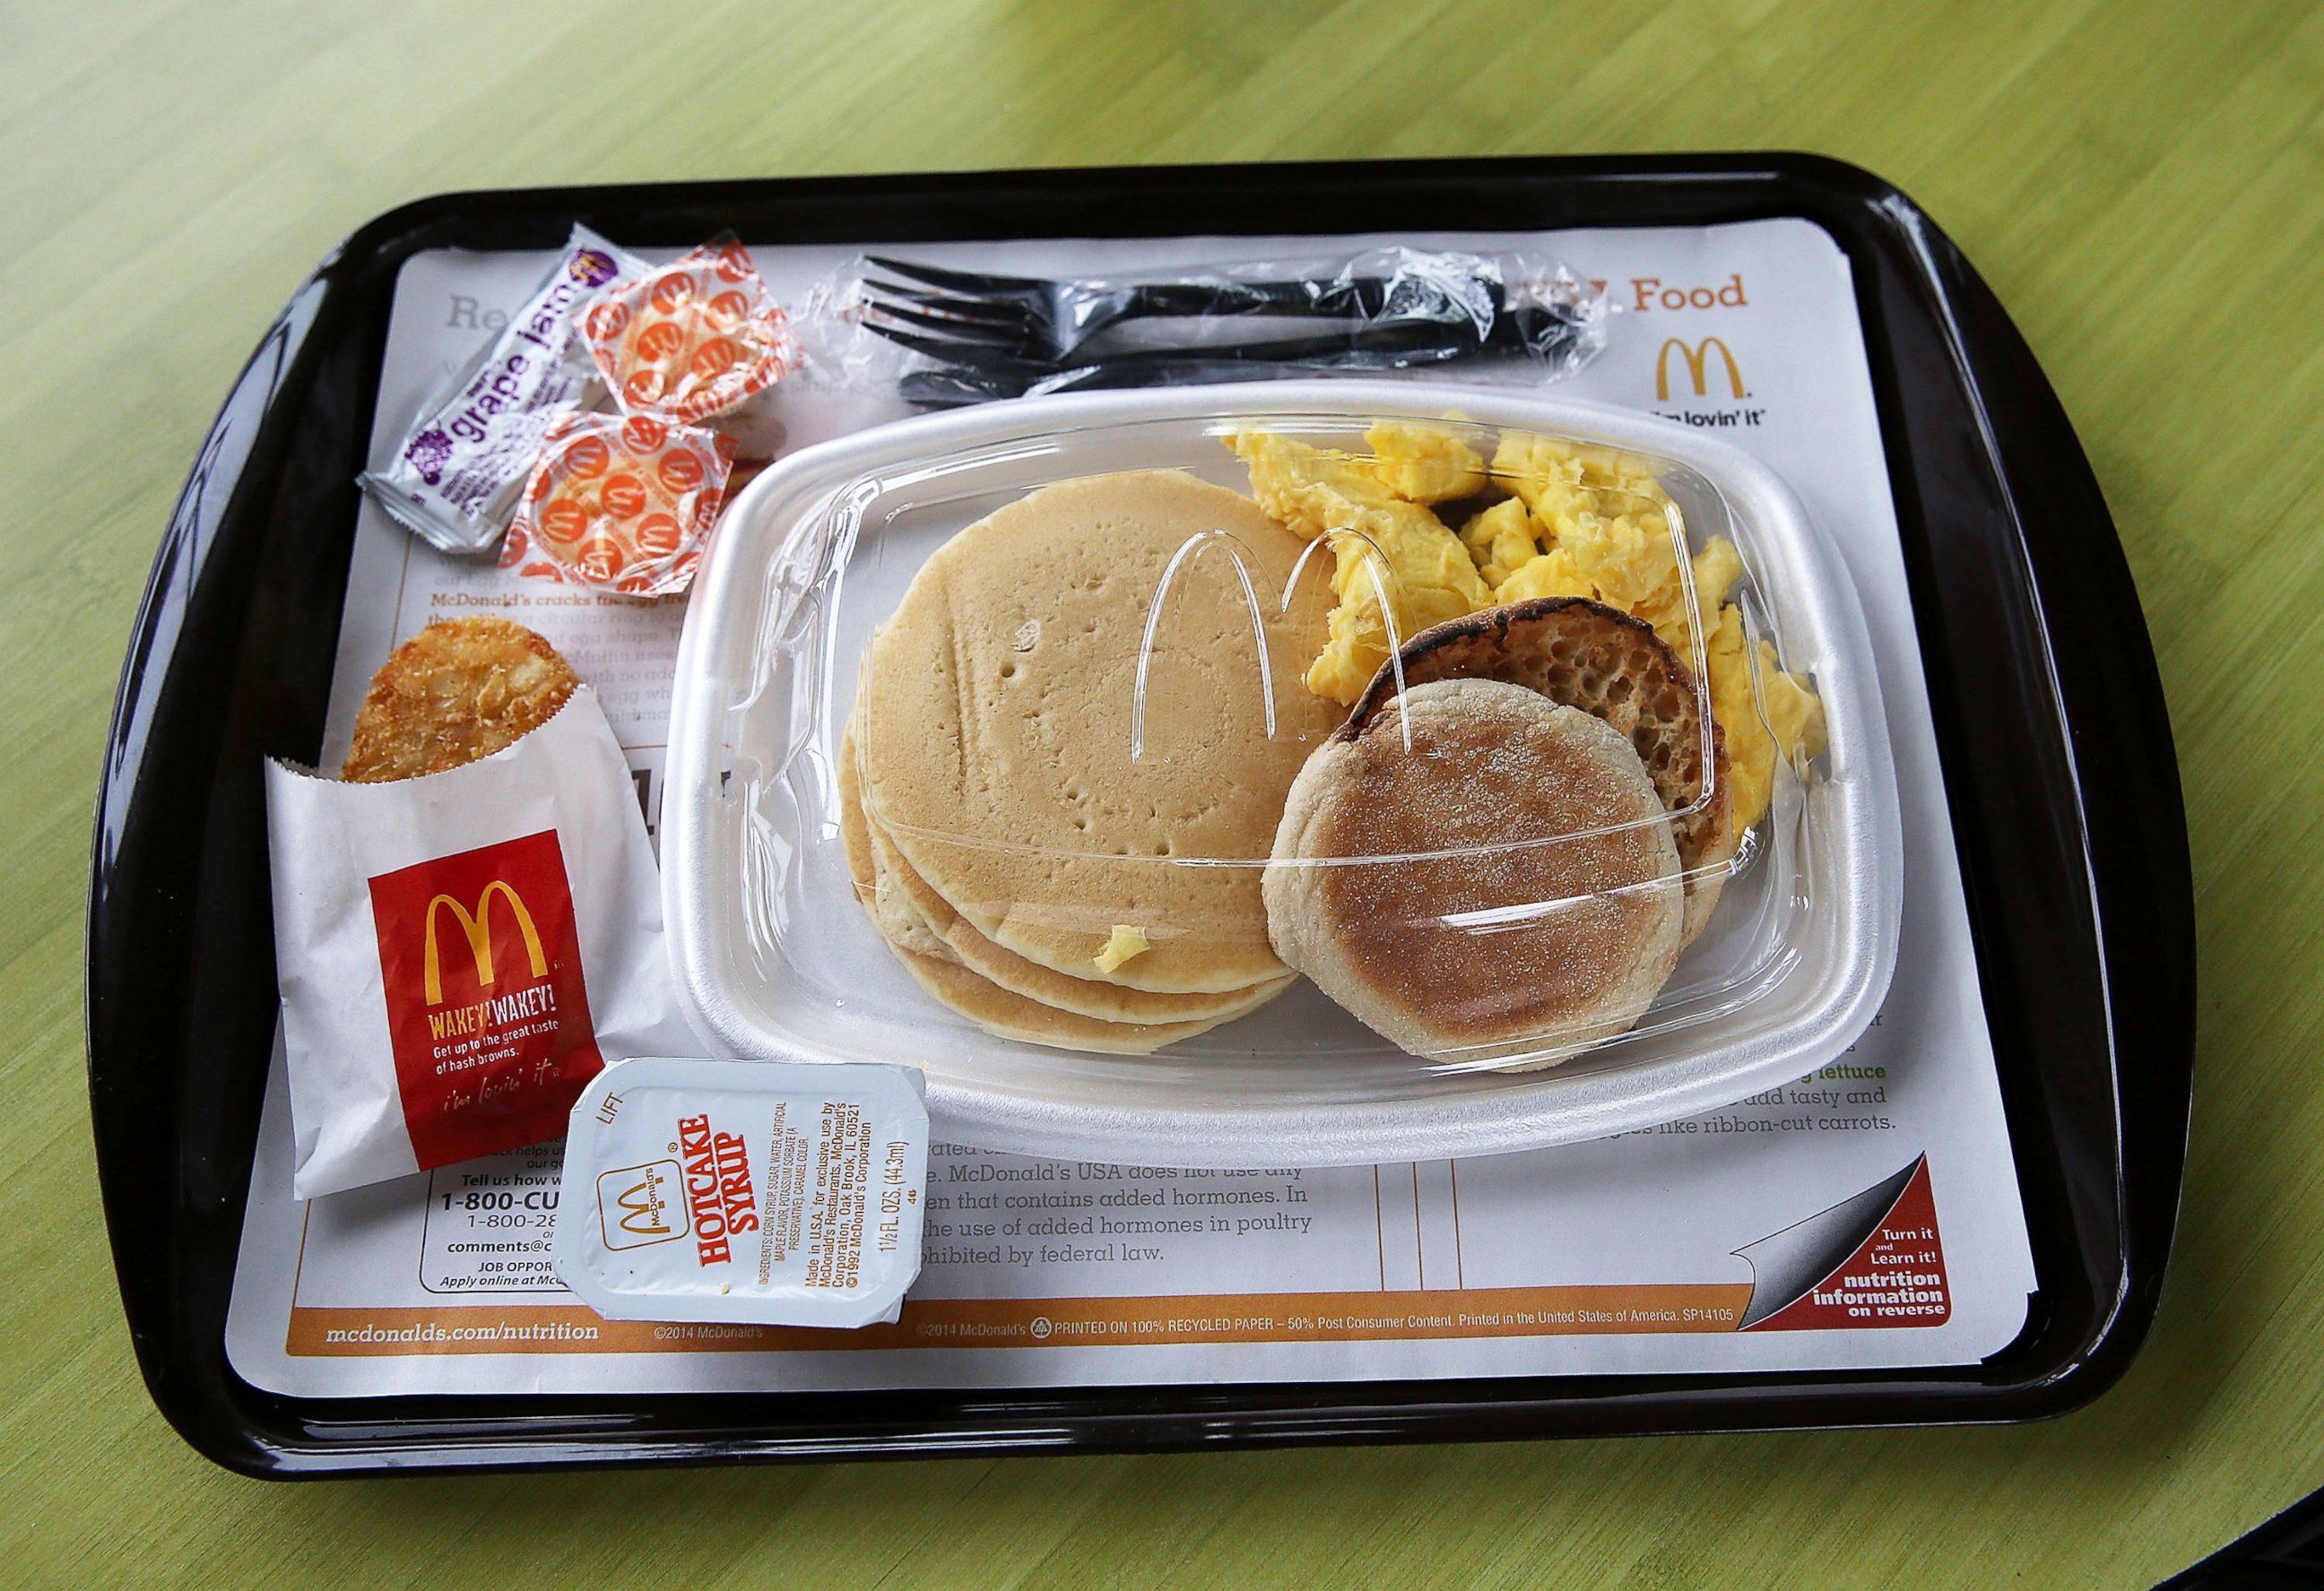 PHOTO: A McDonald's "Big Breakfast" is displayed at a McDonald's restaurant on July 23, 2015 in Fairfield, Calif.